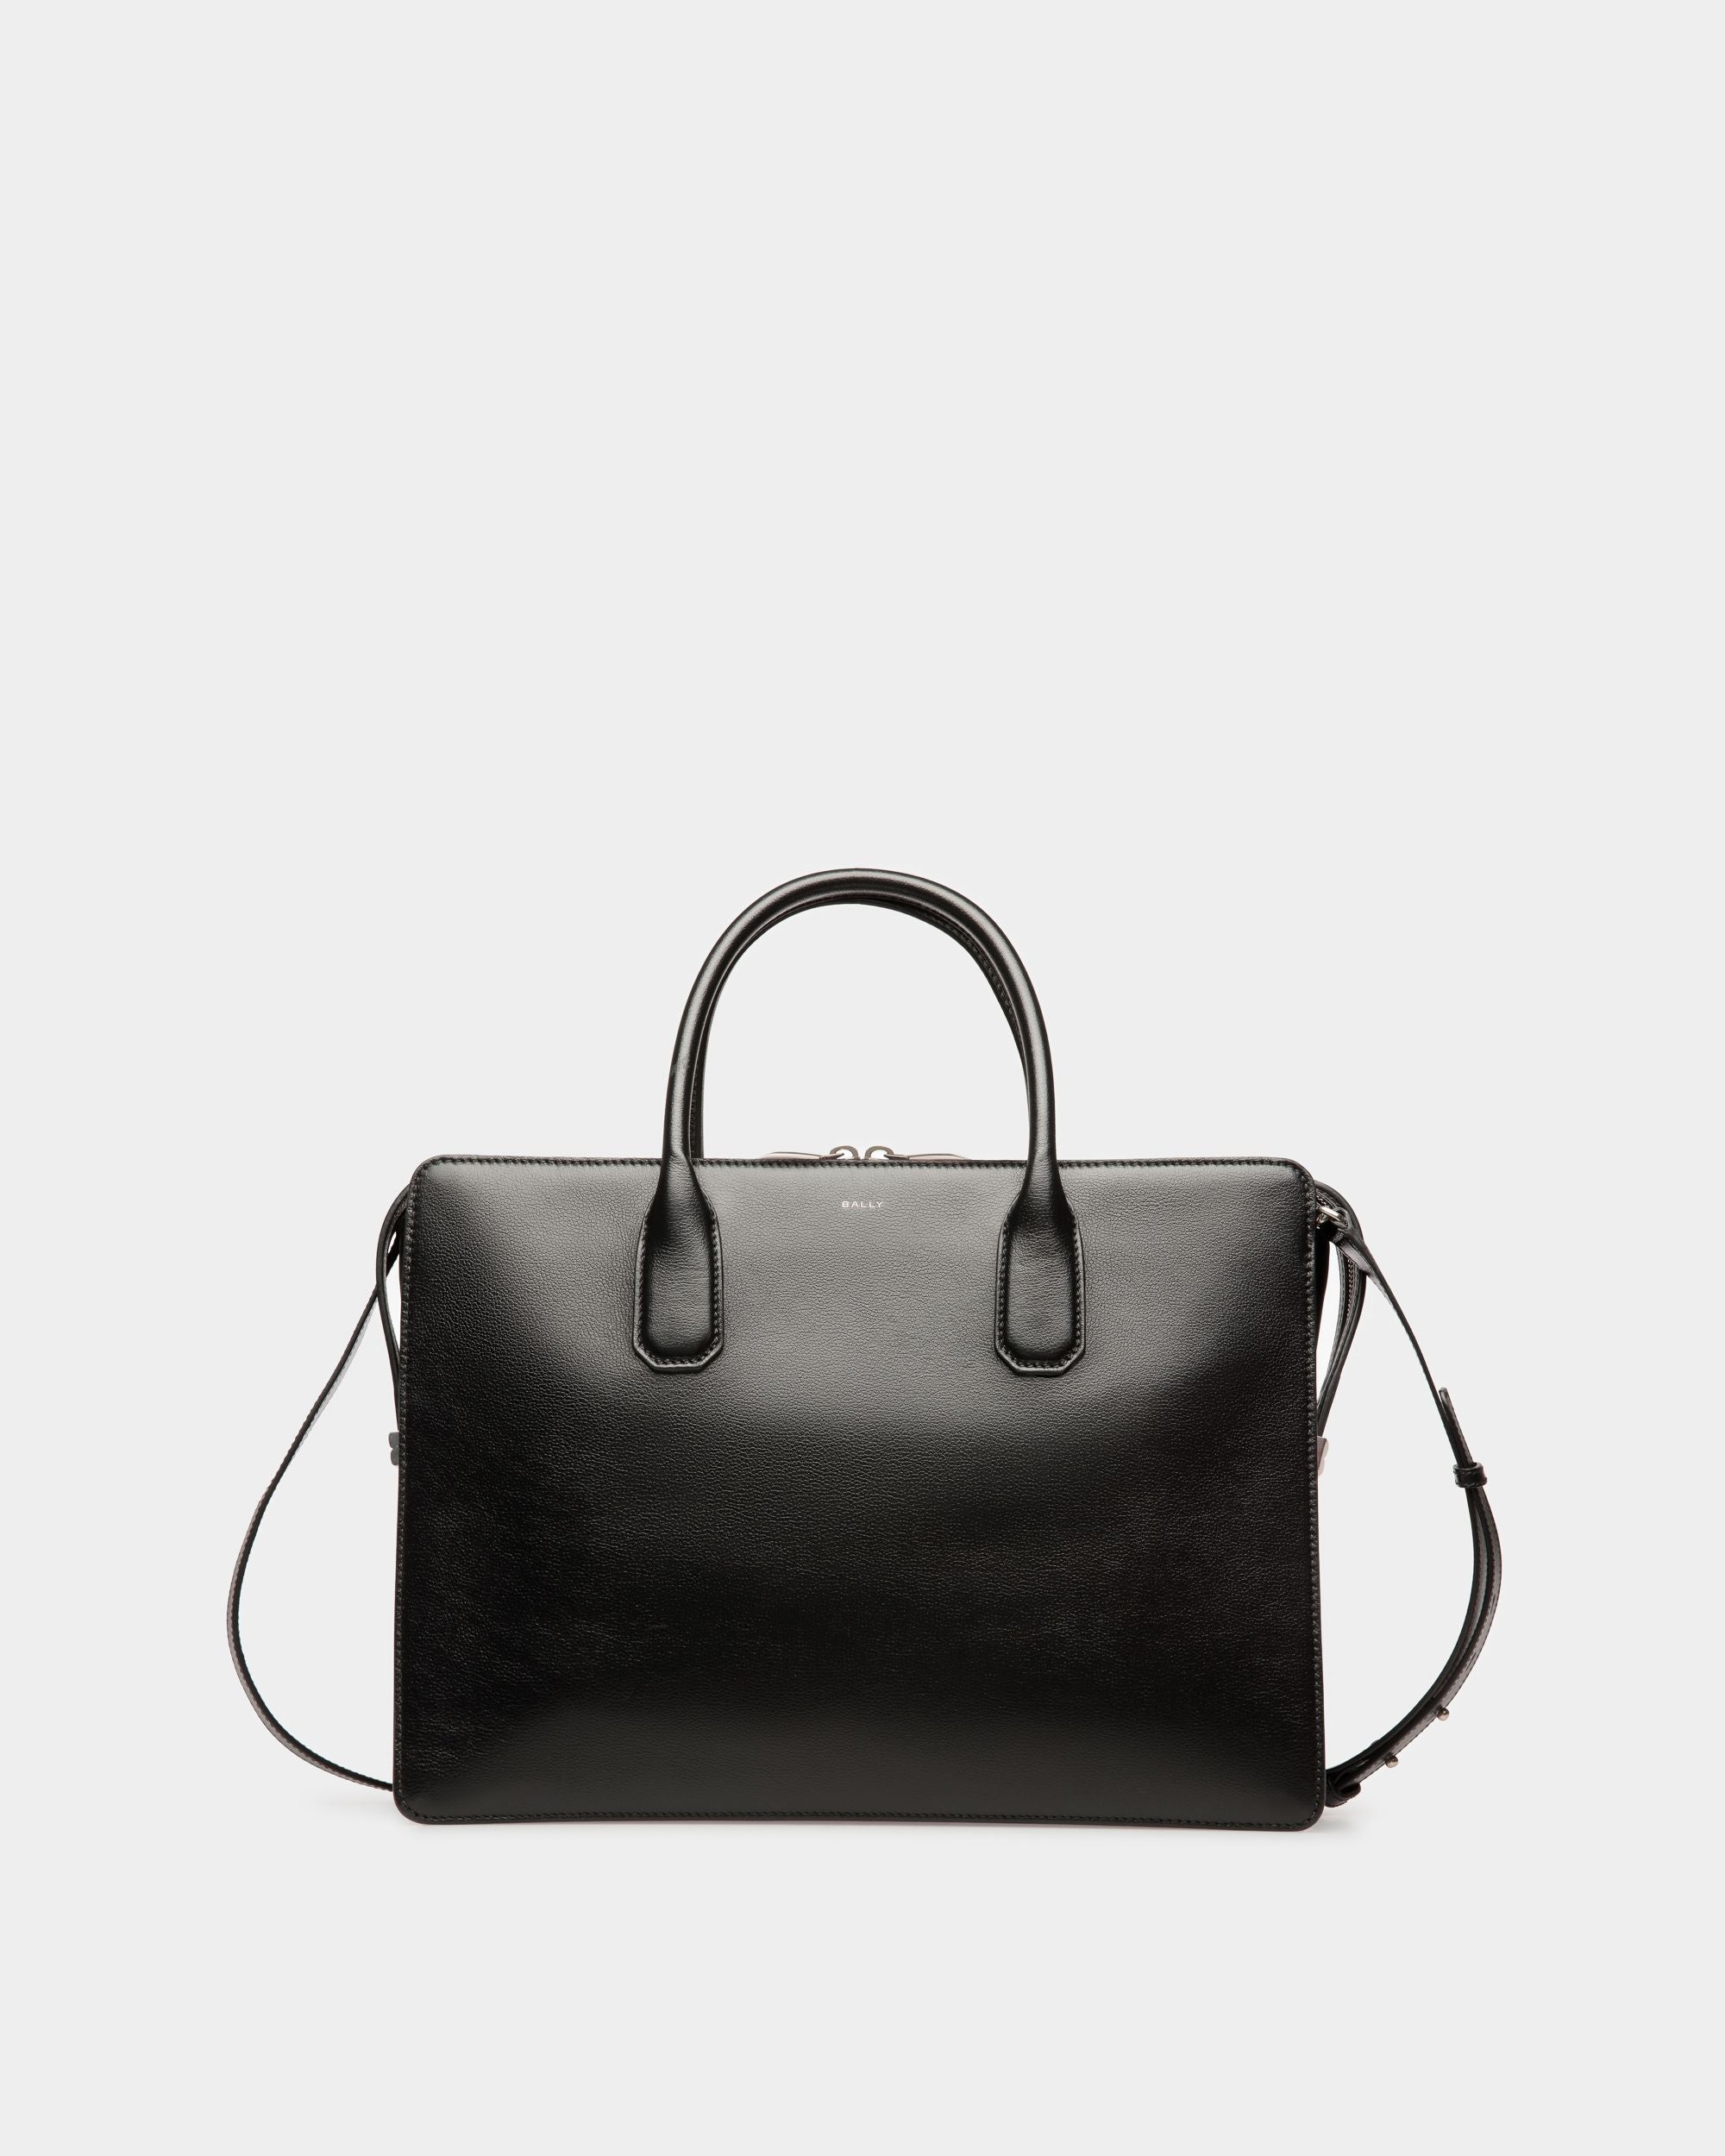 Busy | Men's Business Bag | Black Leather | Bally | Still Life Front